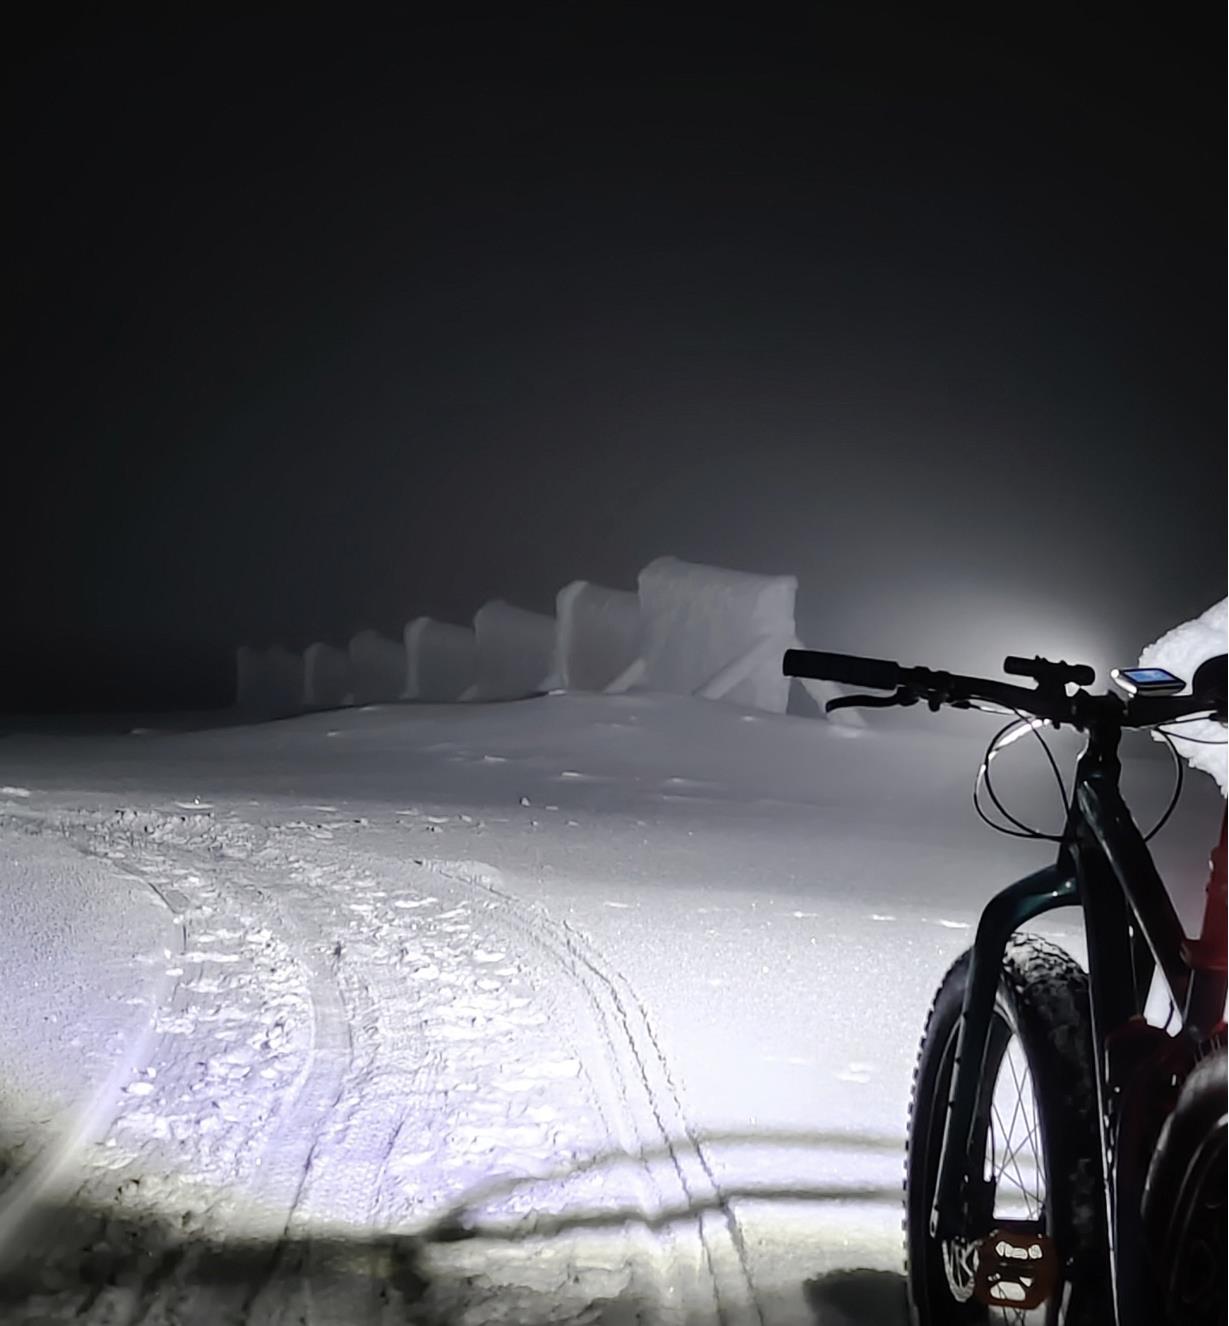 The flashlight attached to a bicycle and illuminating a snowy field